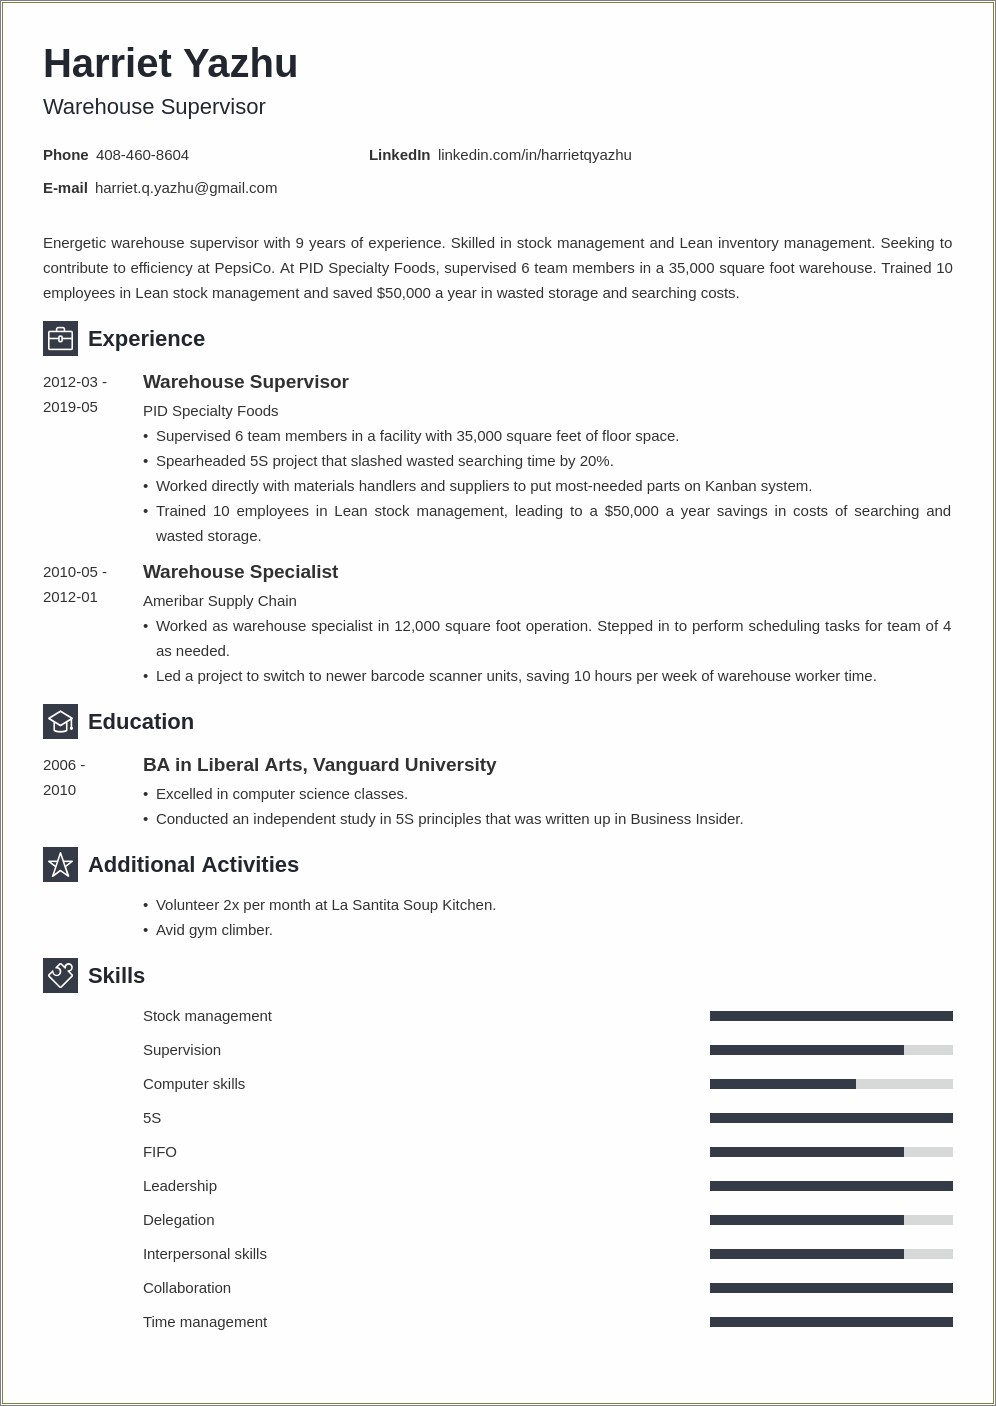 Data Warehouse Project Manager Resume Docx